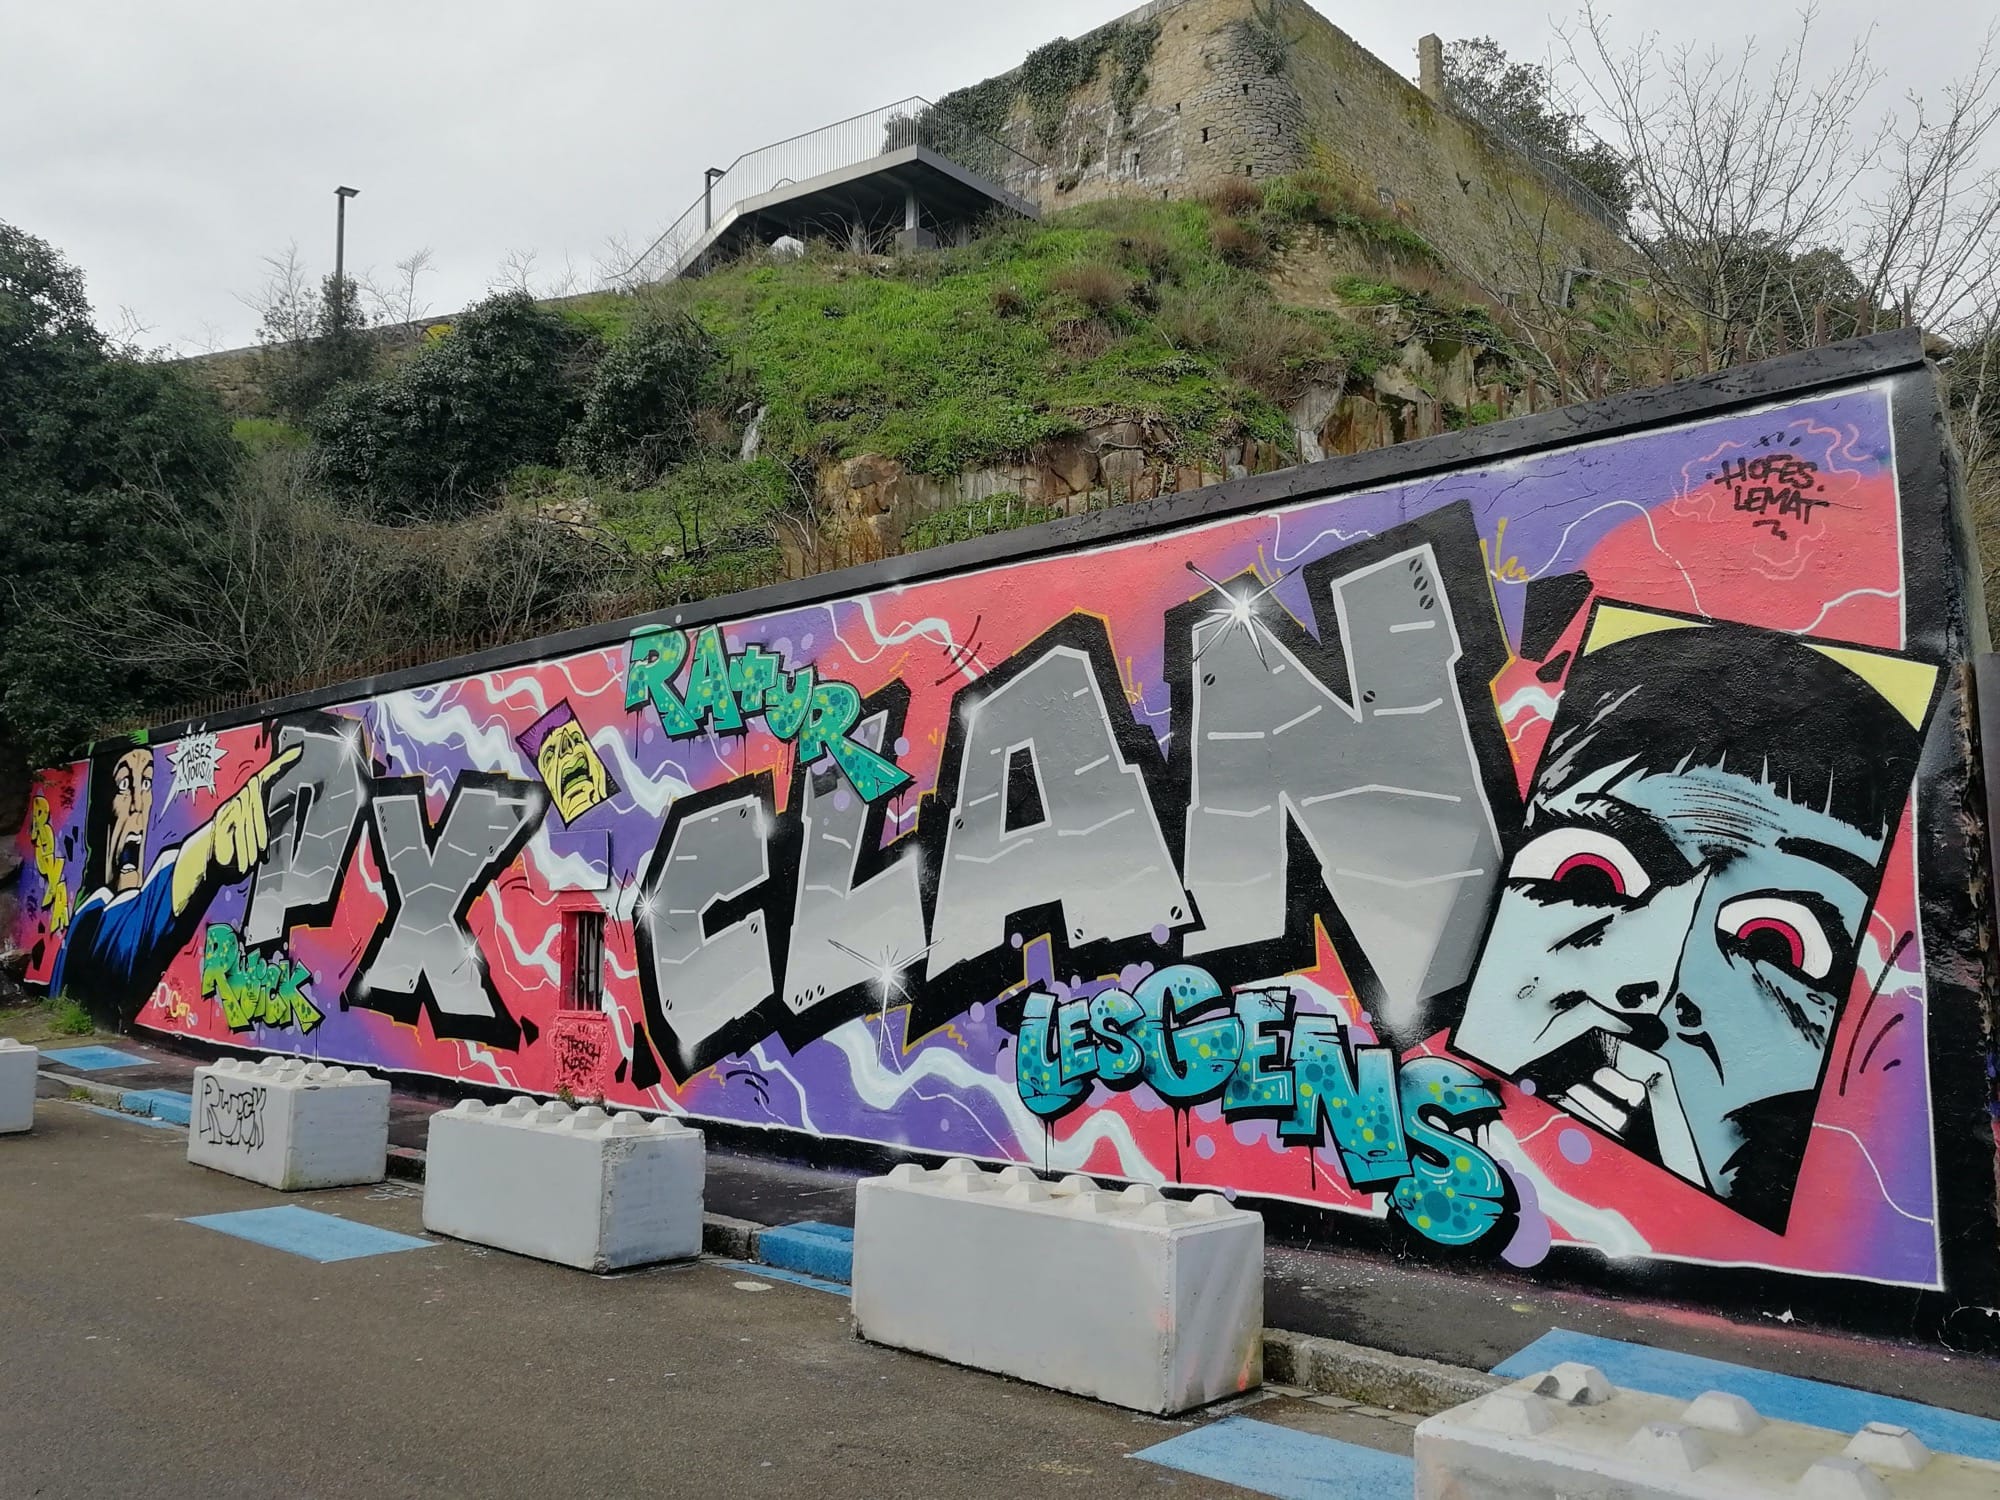 Graffiti 4030  captured by Rabot in Nantes France